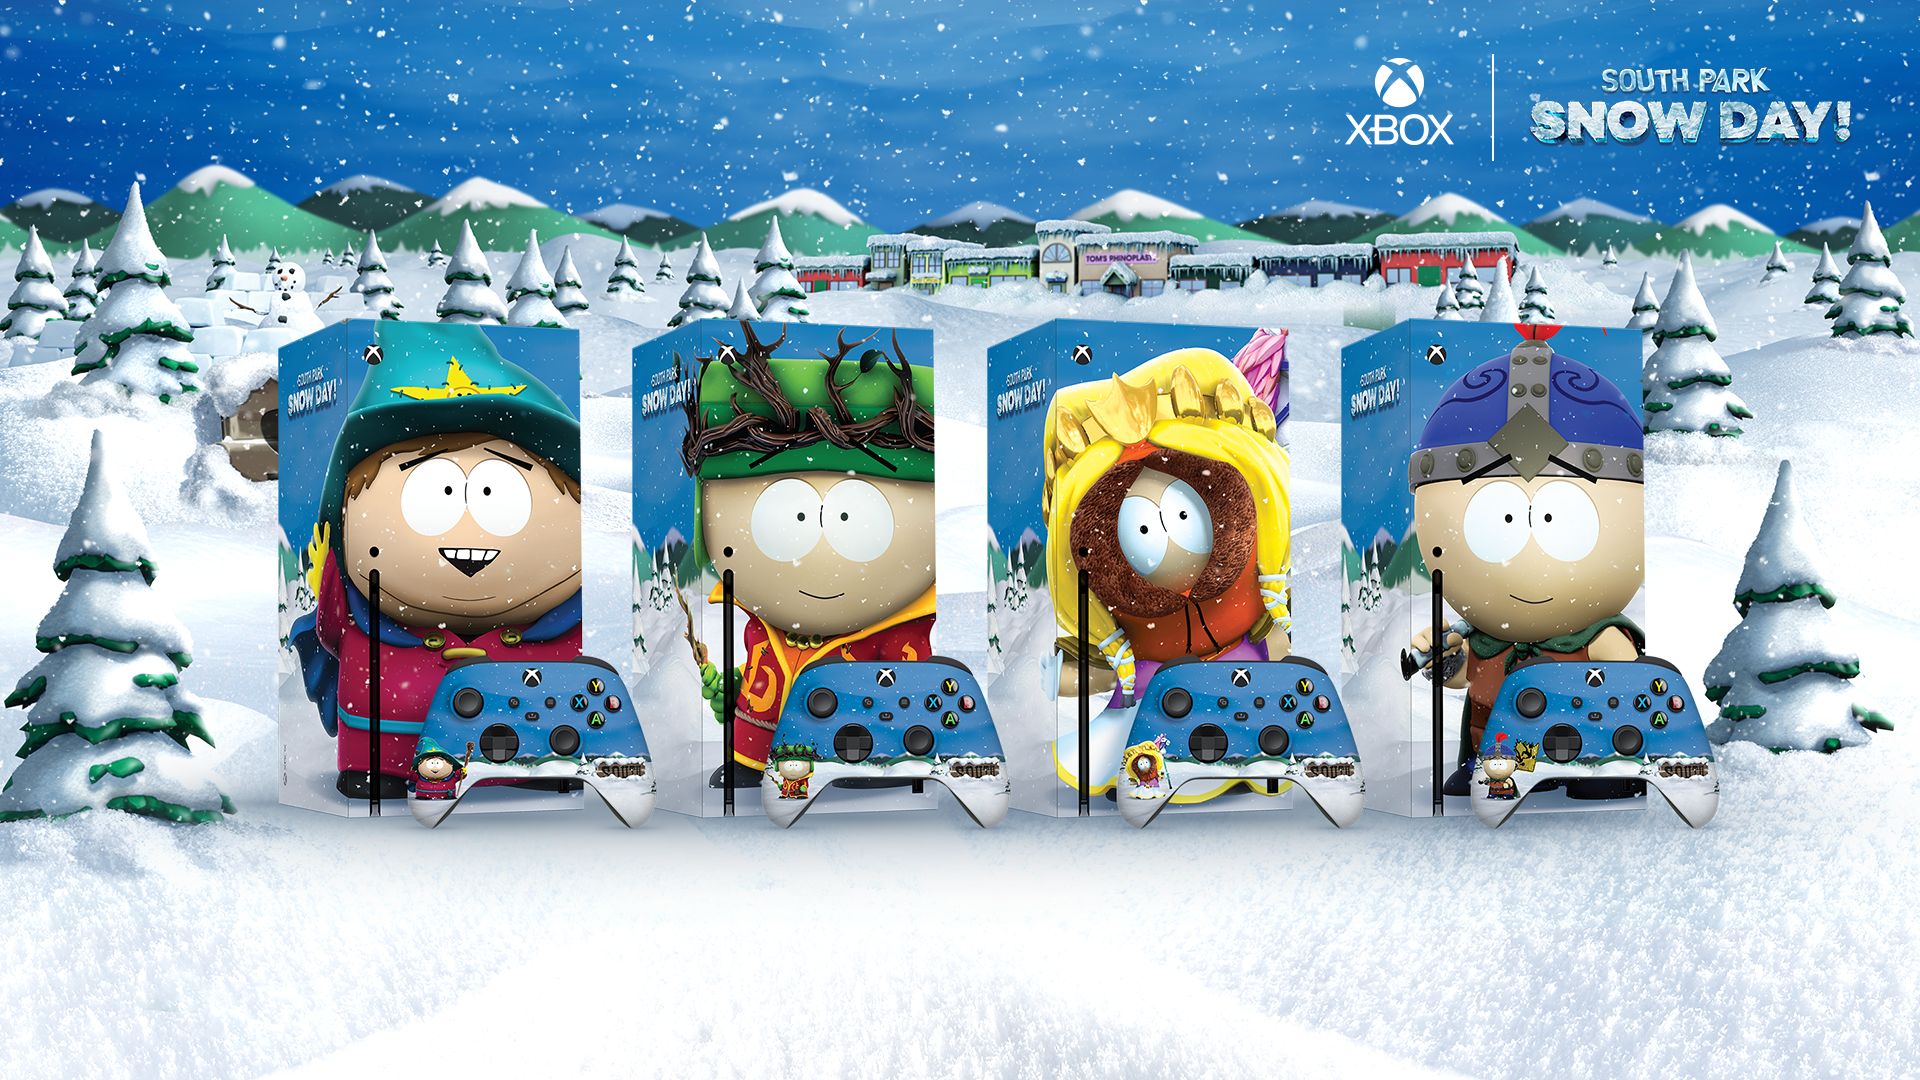 South Park Snow Day Sweepstakes Hero Image